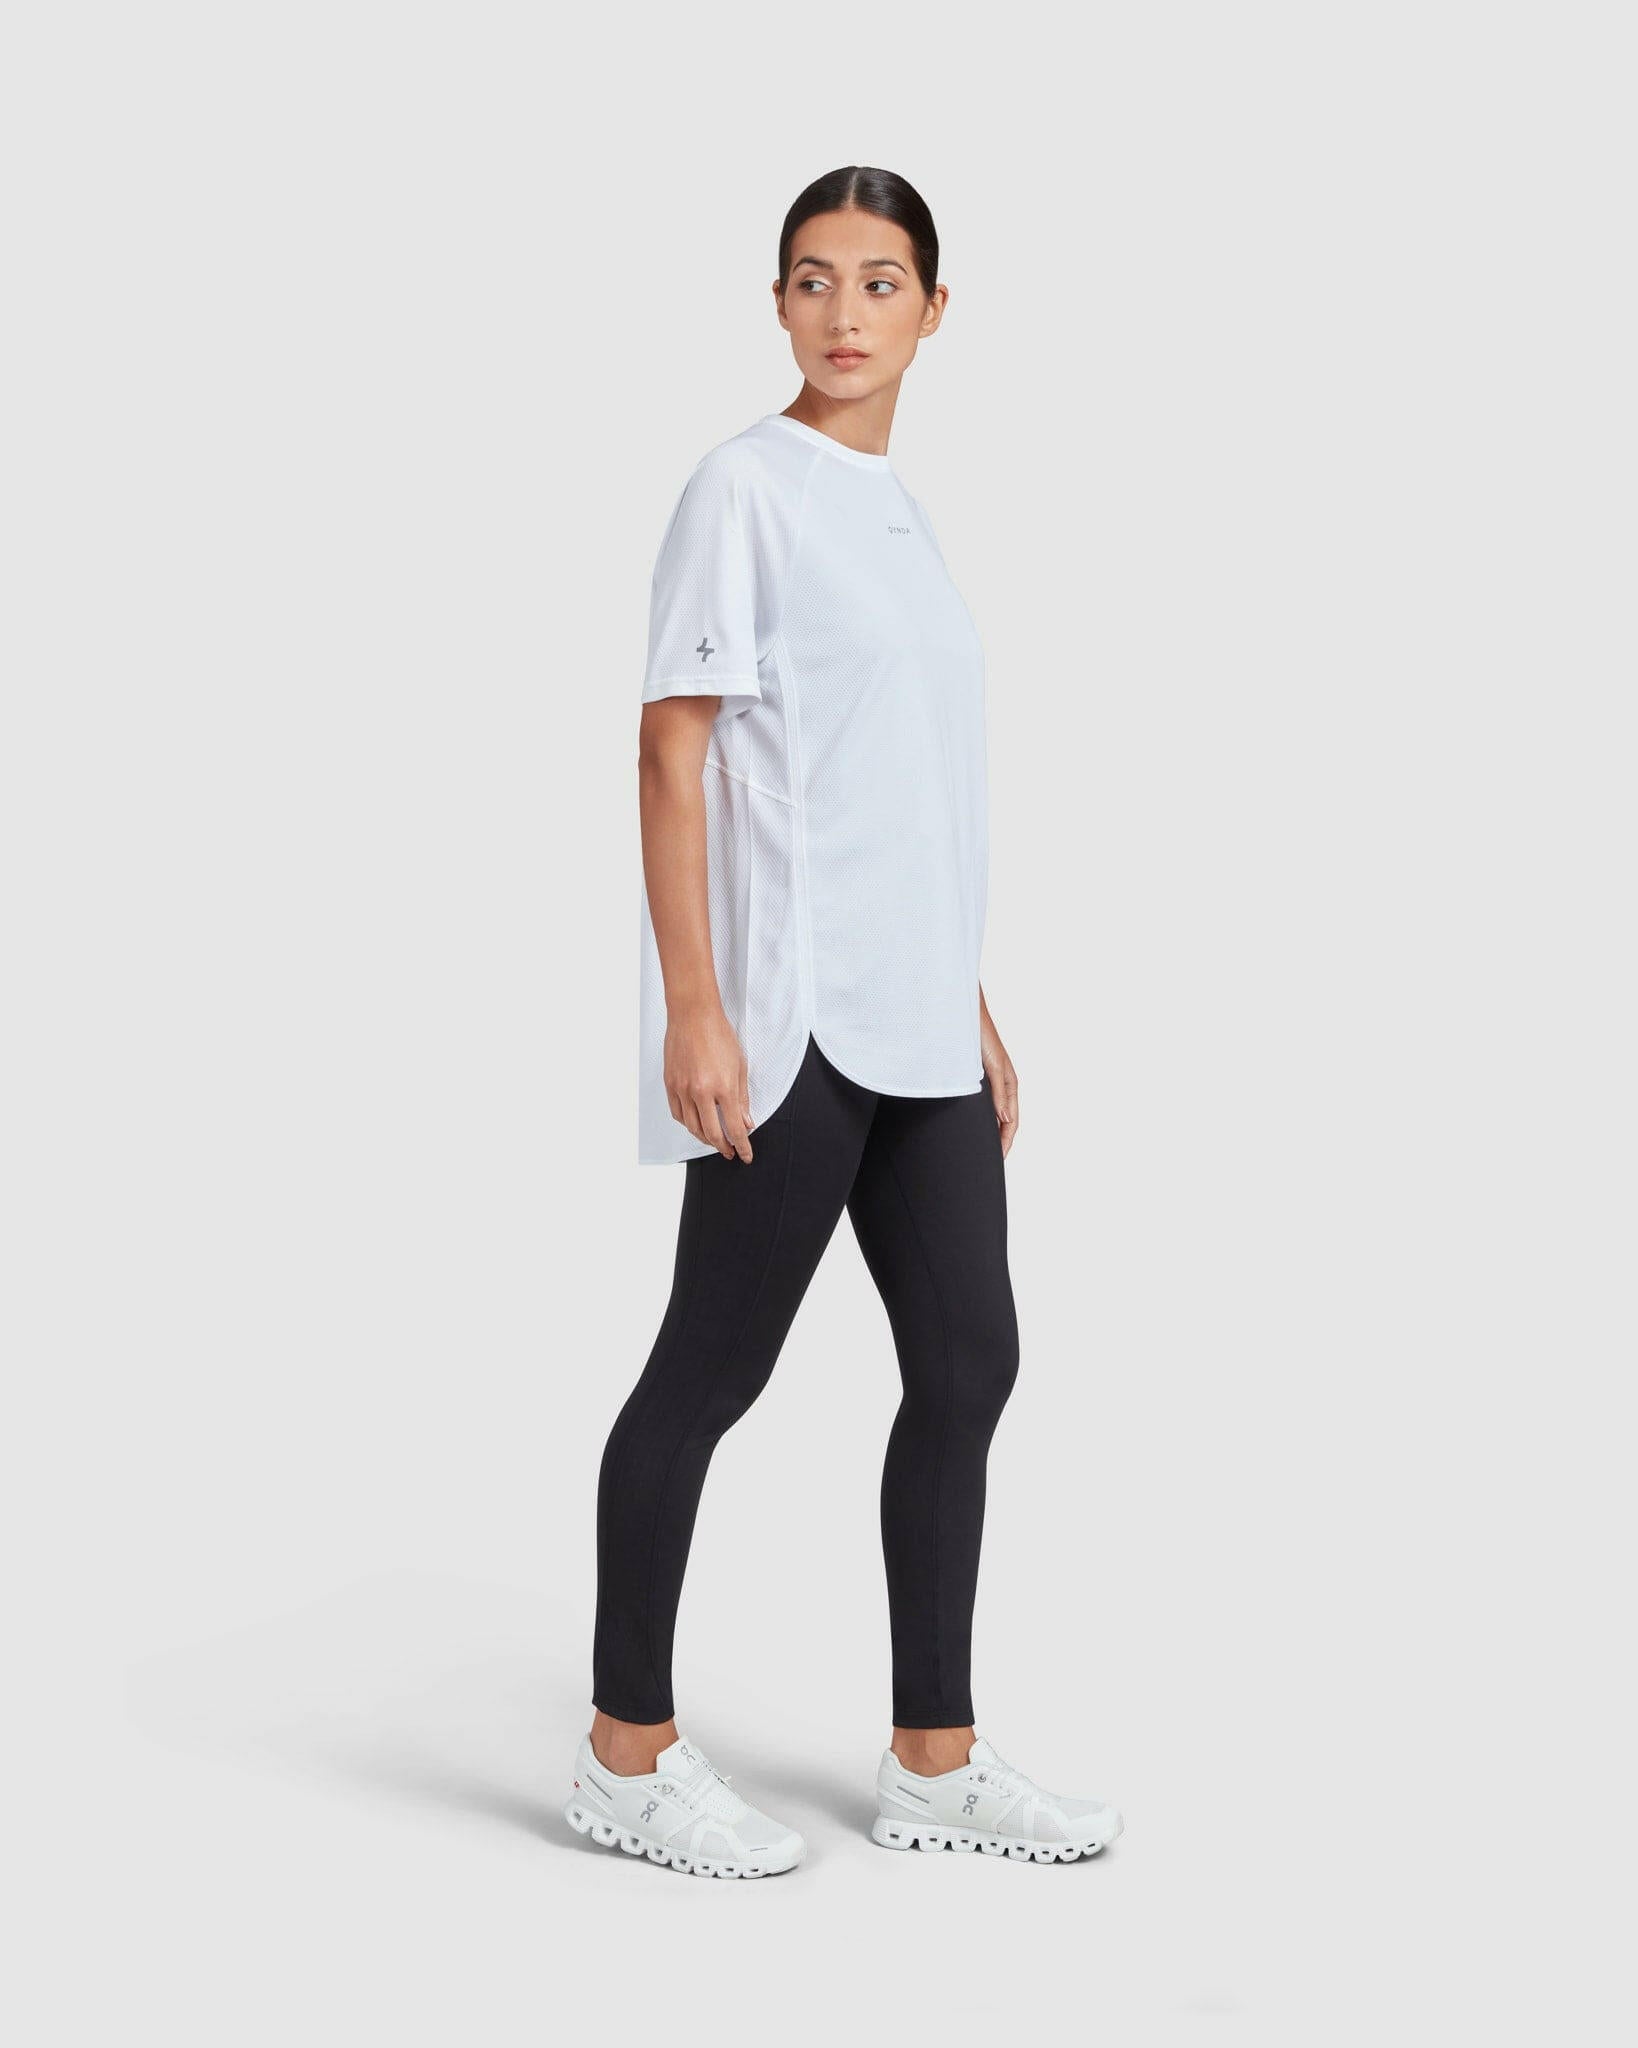 A woman in a white short sleeve t-shirt and black leggings standing against a white background, giving a side pose while gazing into the distance, exemplifying a casual, sporty, and breathable look